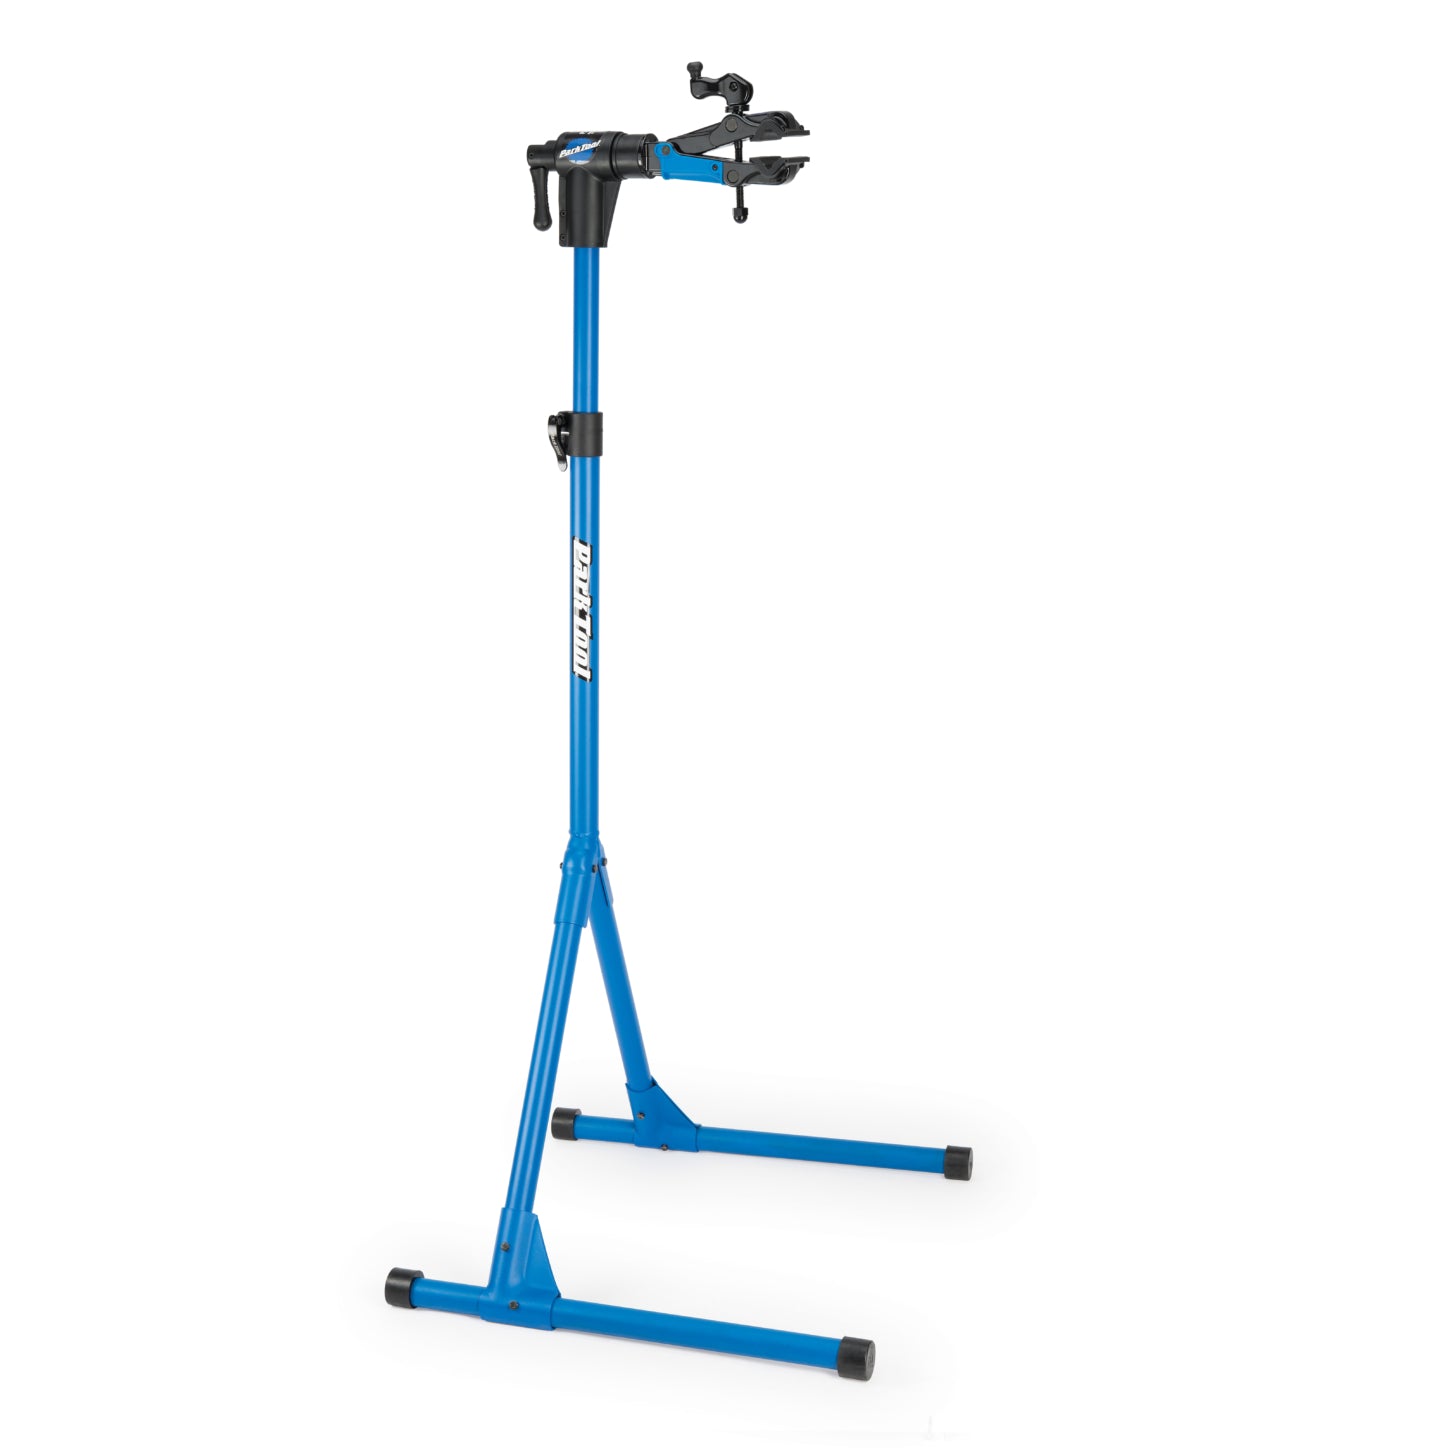 Park Tool PCS-4.2 Deluxe Home Mechanic Repair Stand - The Bikesmiths